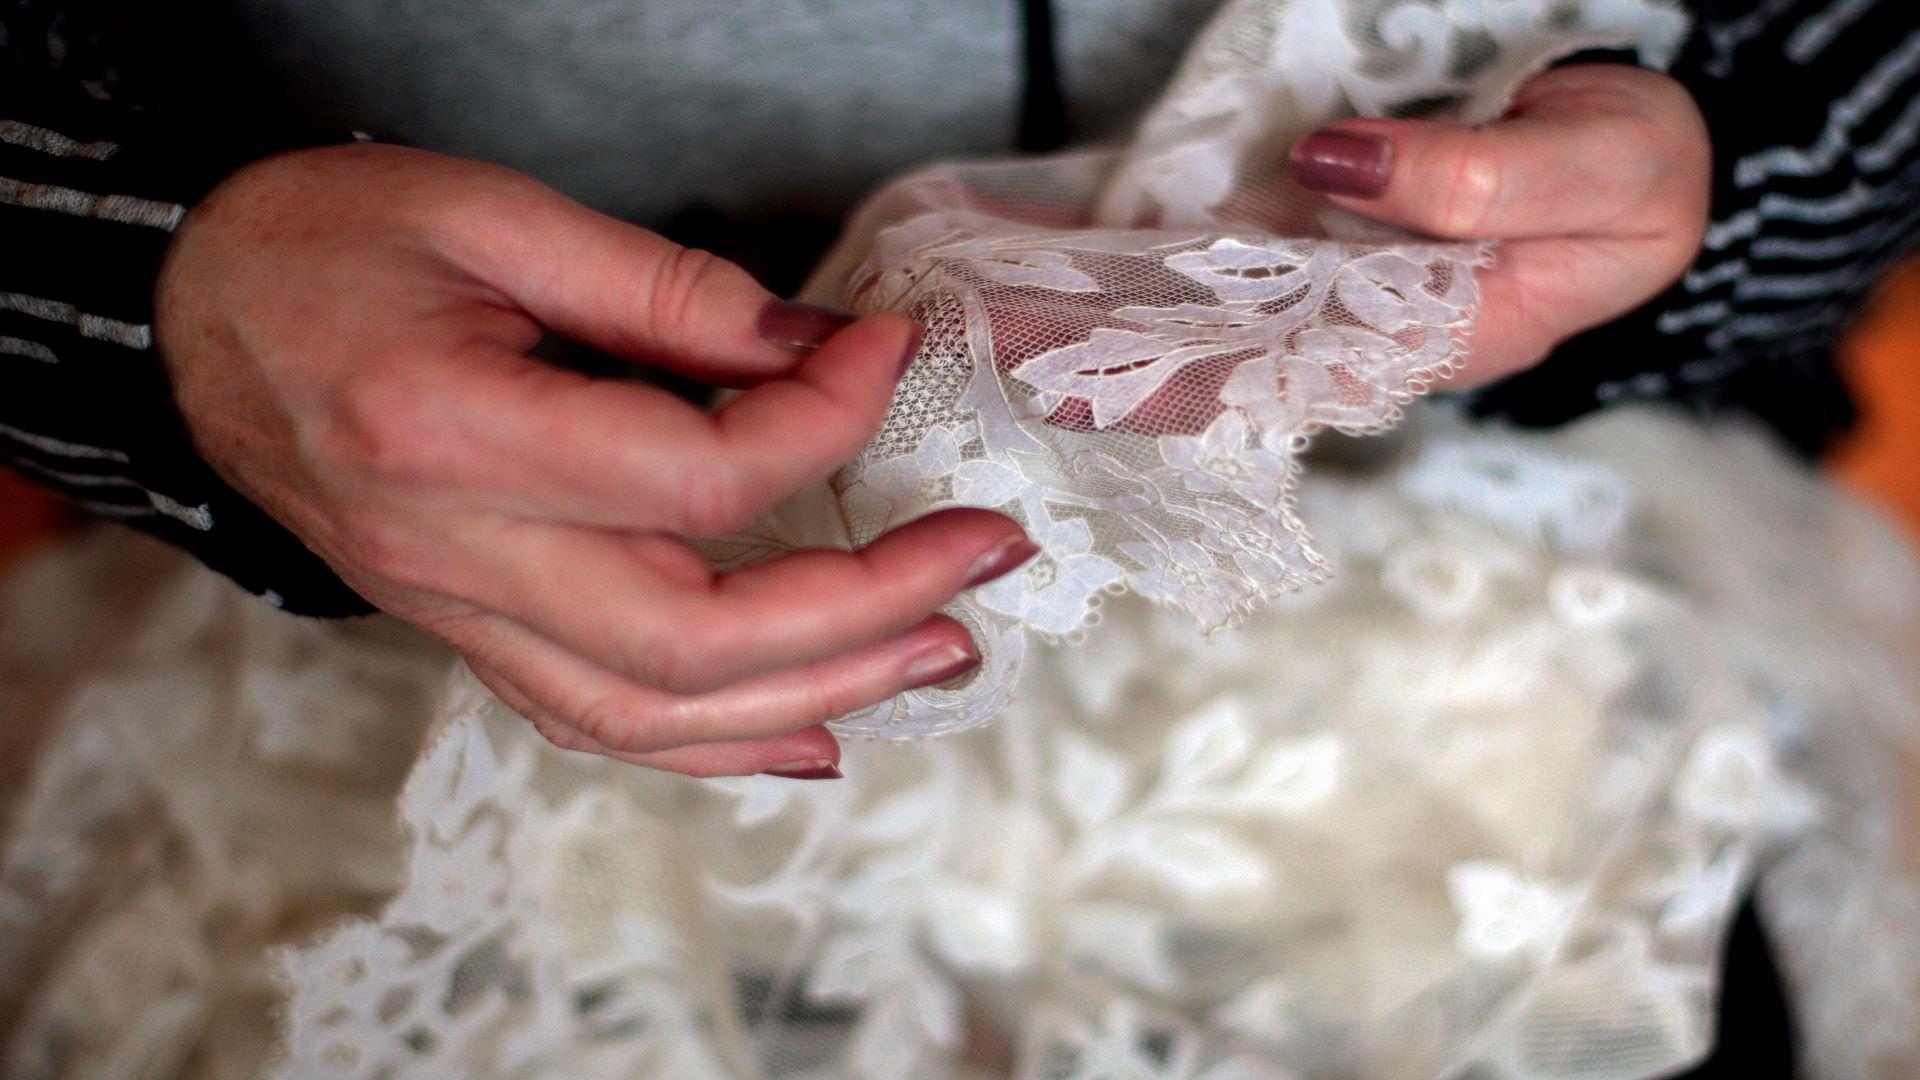 Heritage Lace making